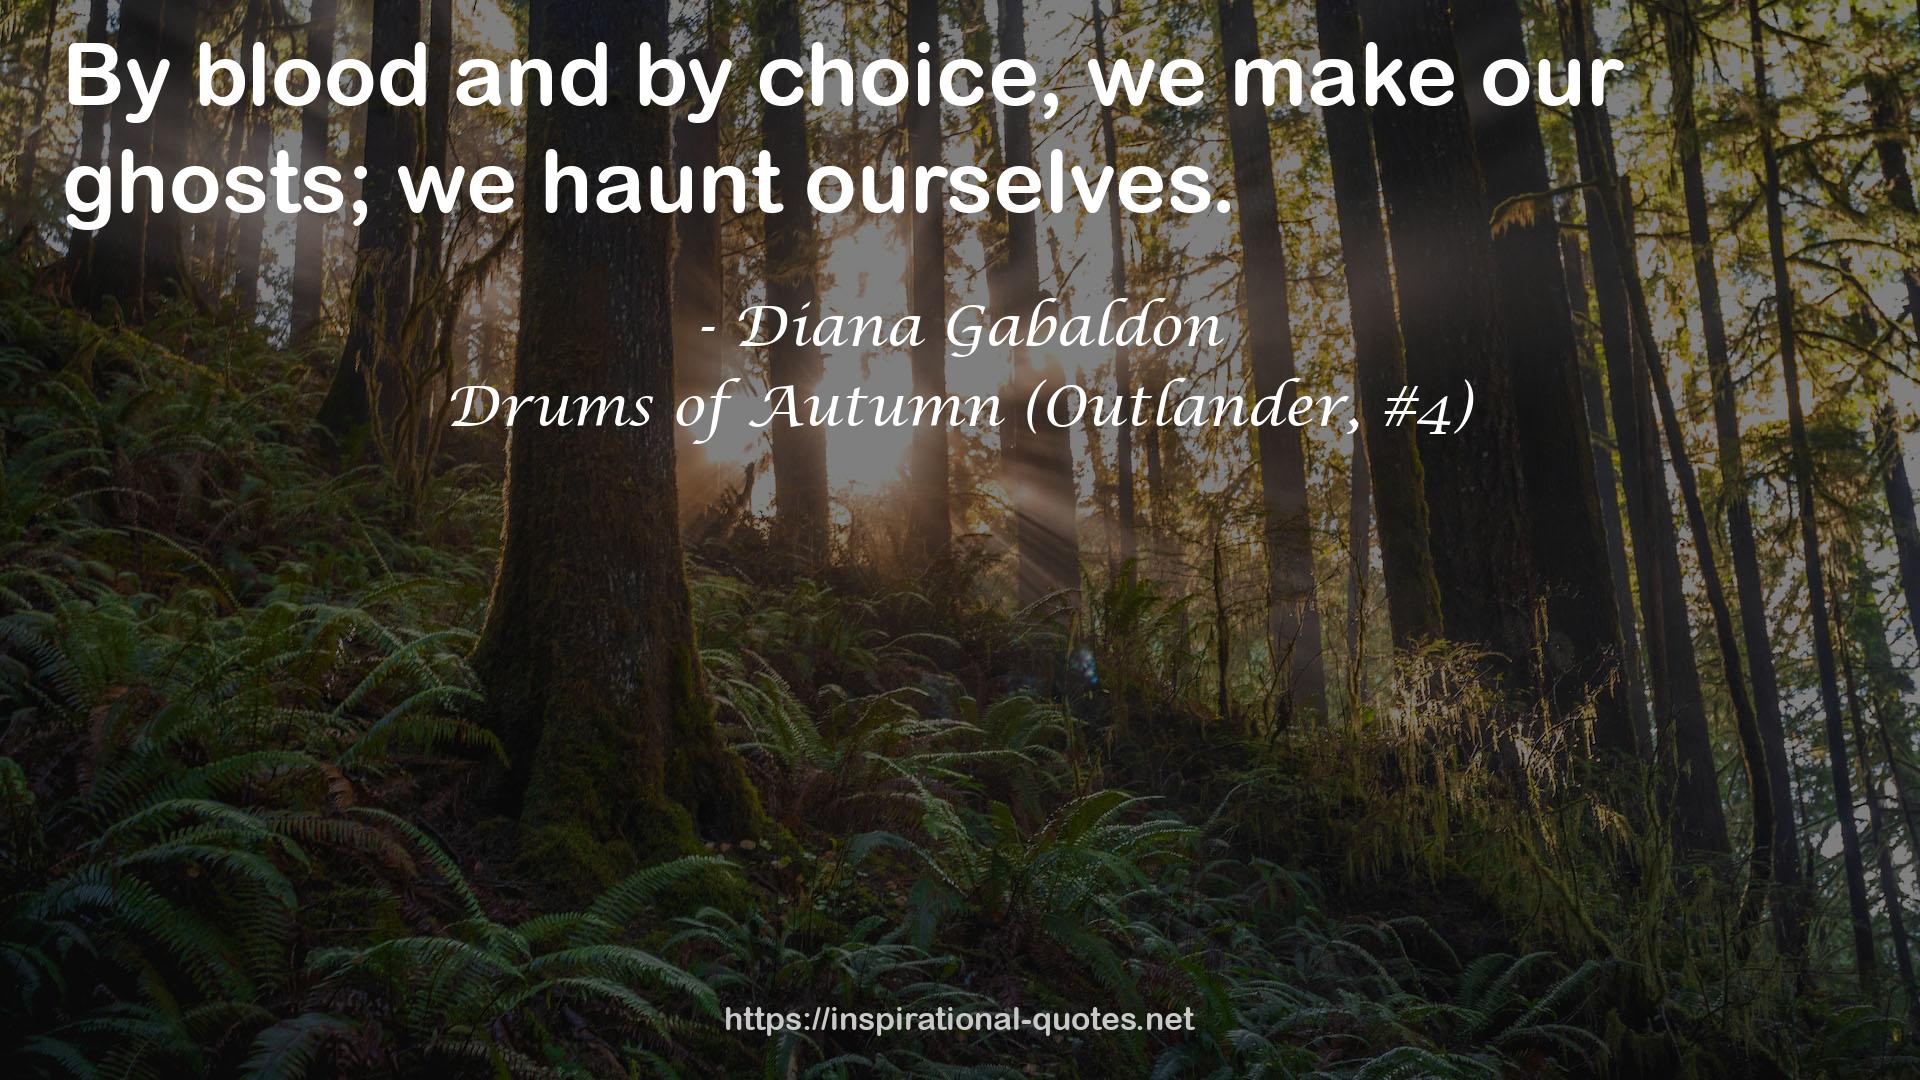 Drums of Autumn (Outlander, #4) QUOTES